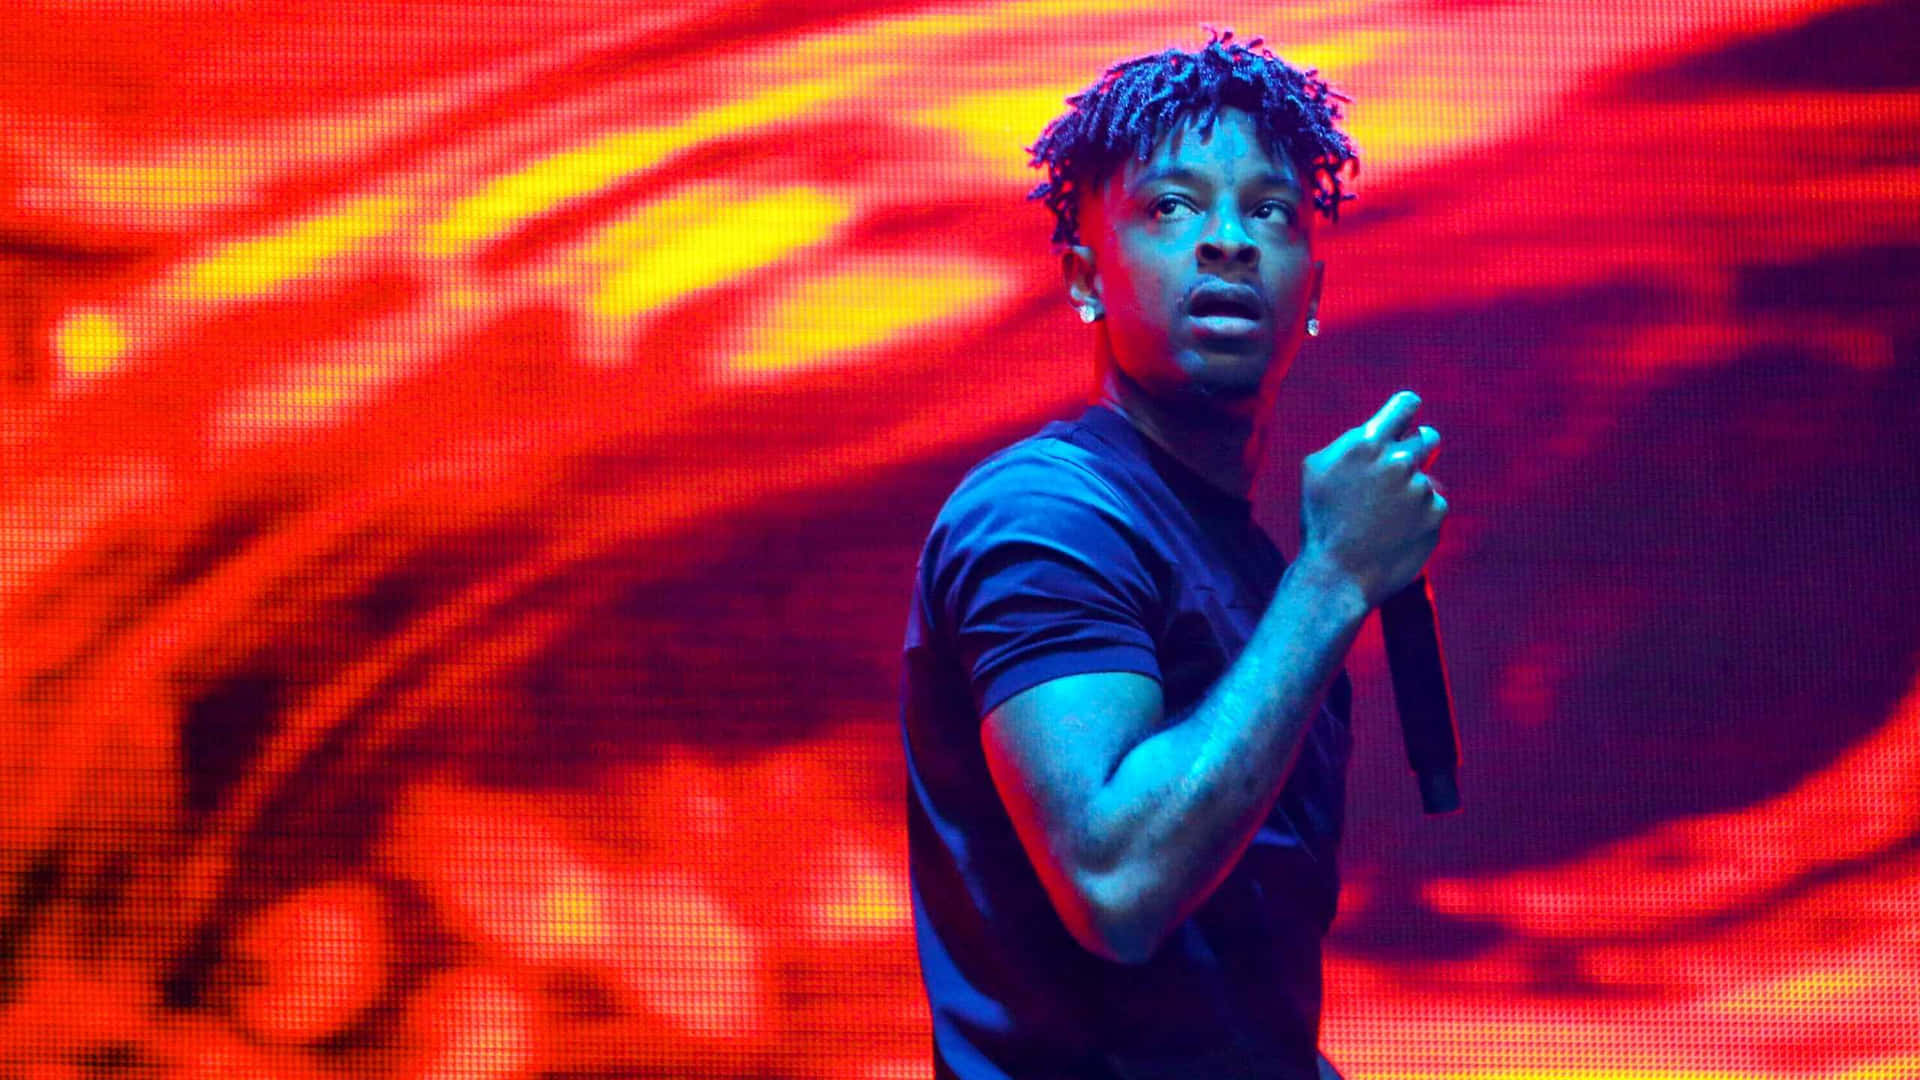 Download 21 Savage At The Live Stage